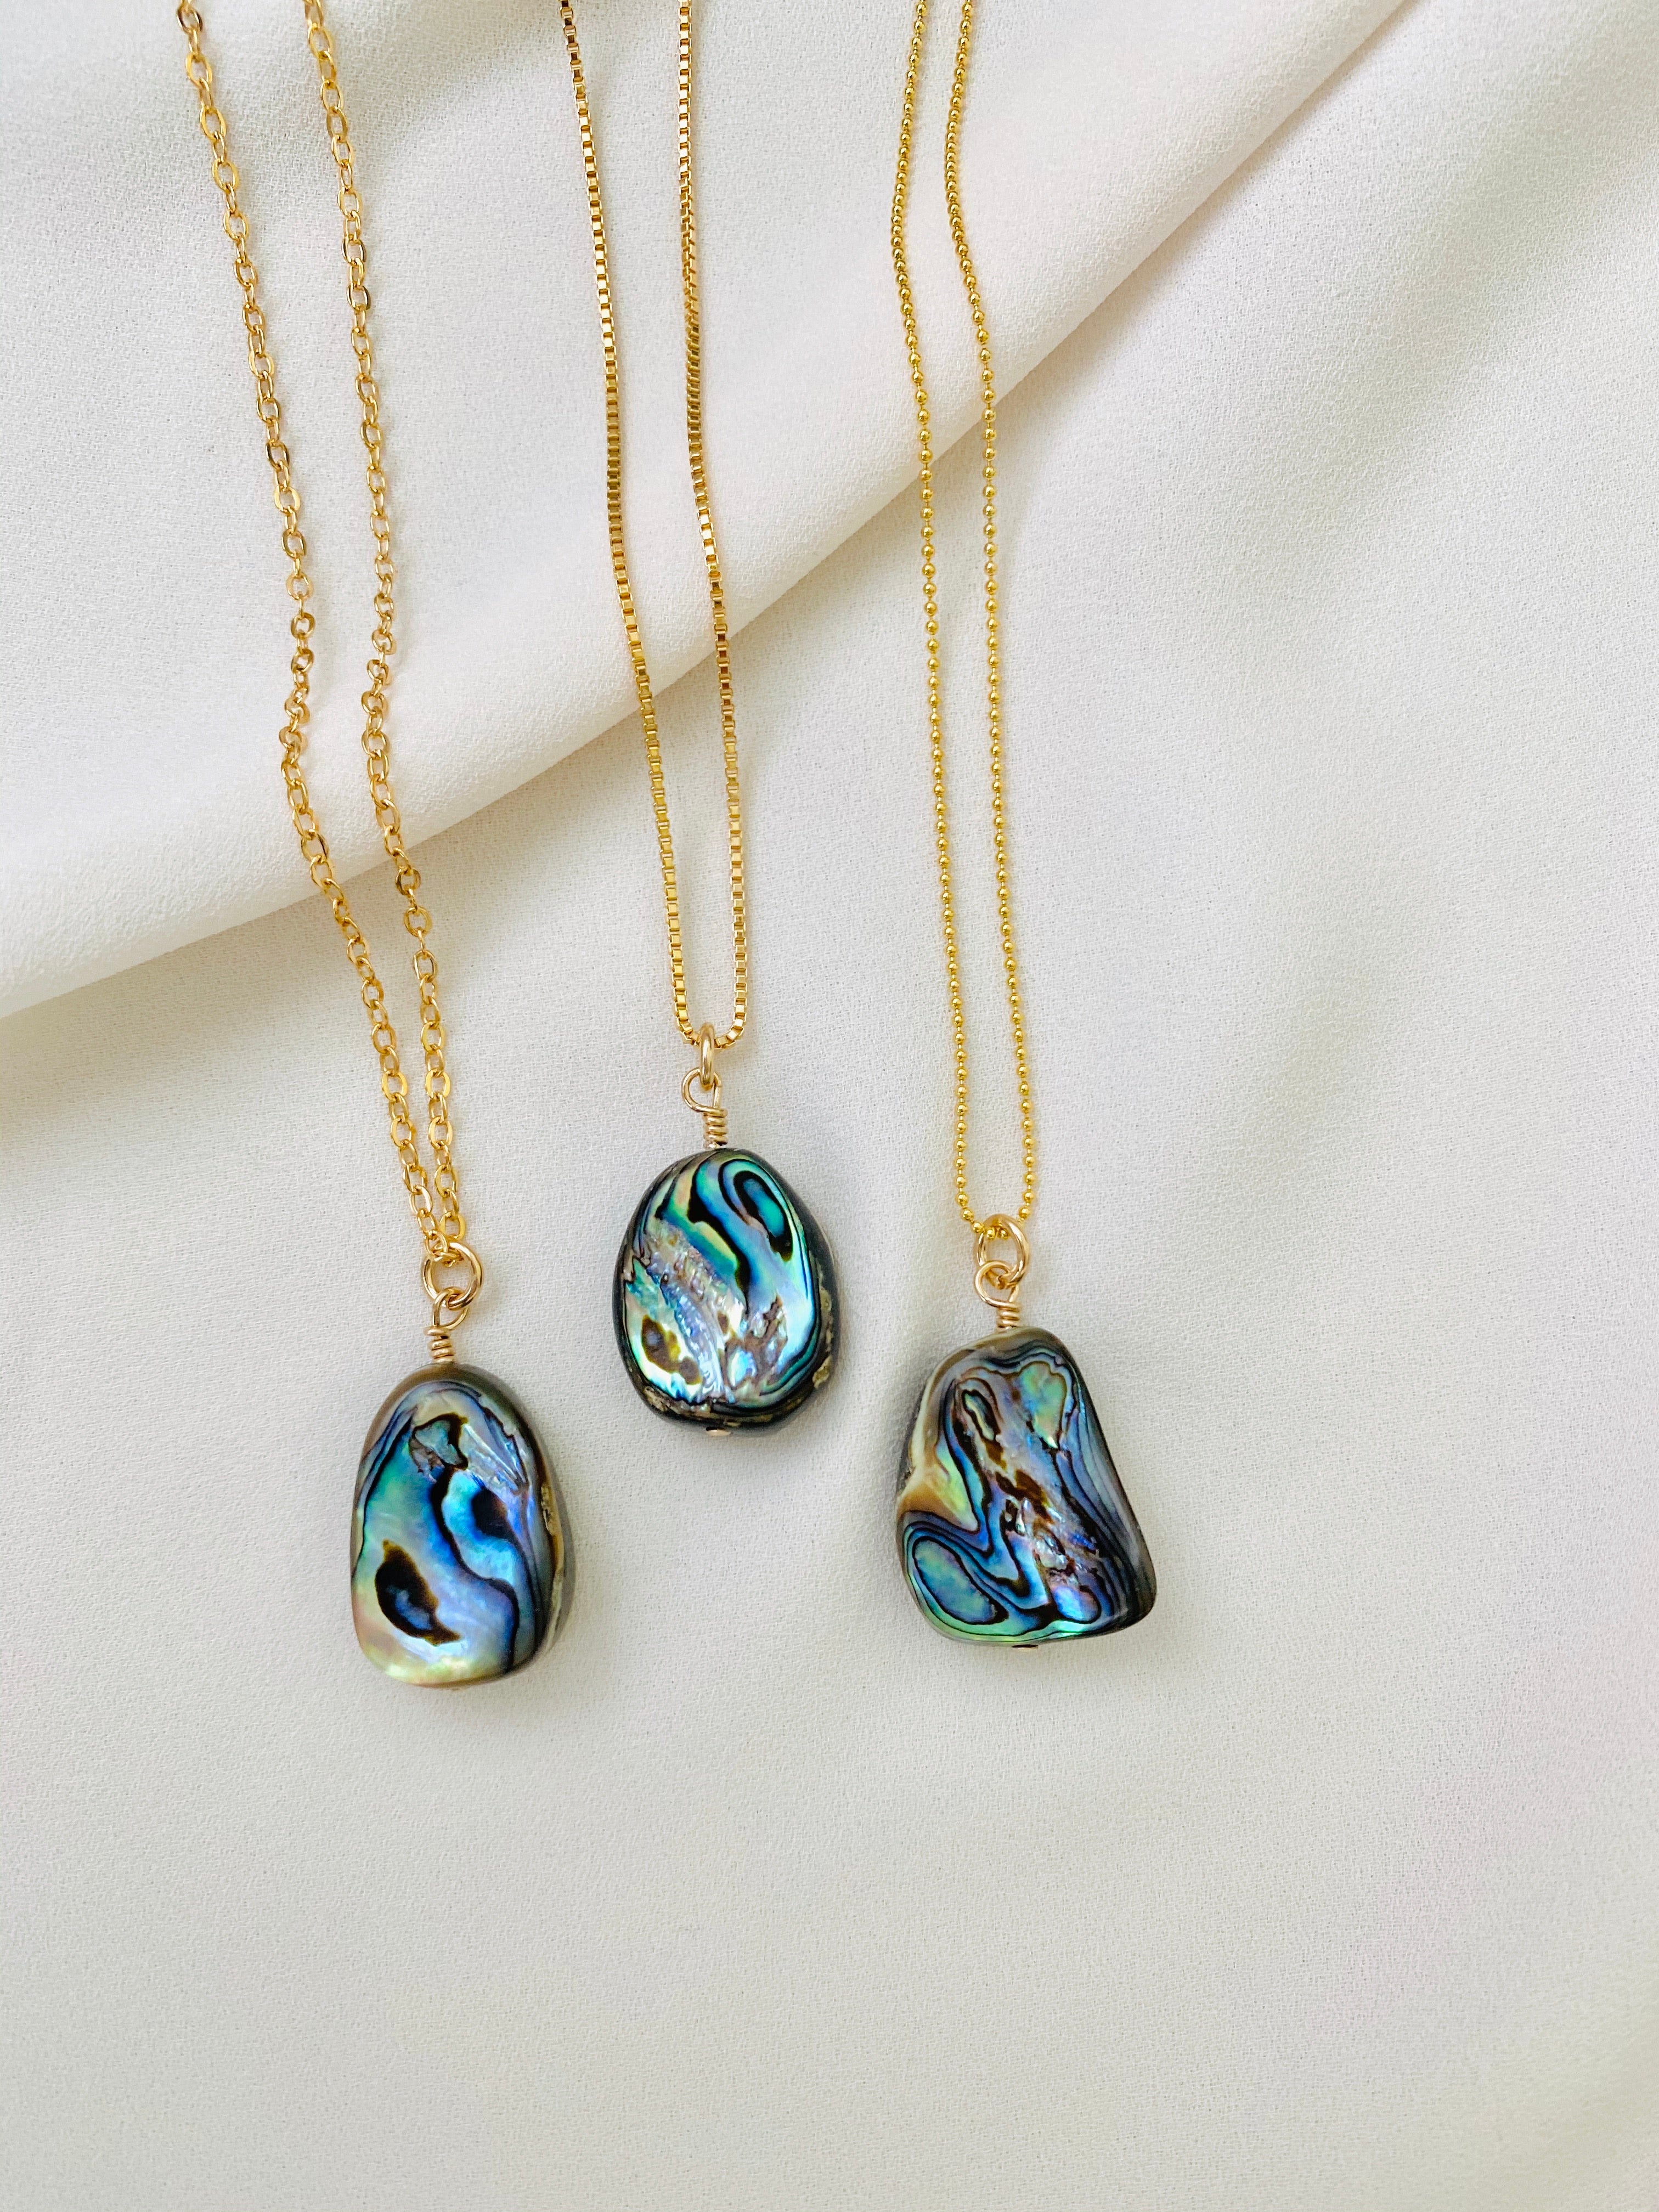 Real Whole Rainbow Abalone Shell Necklace – The Wistful Woods